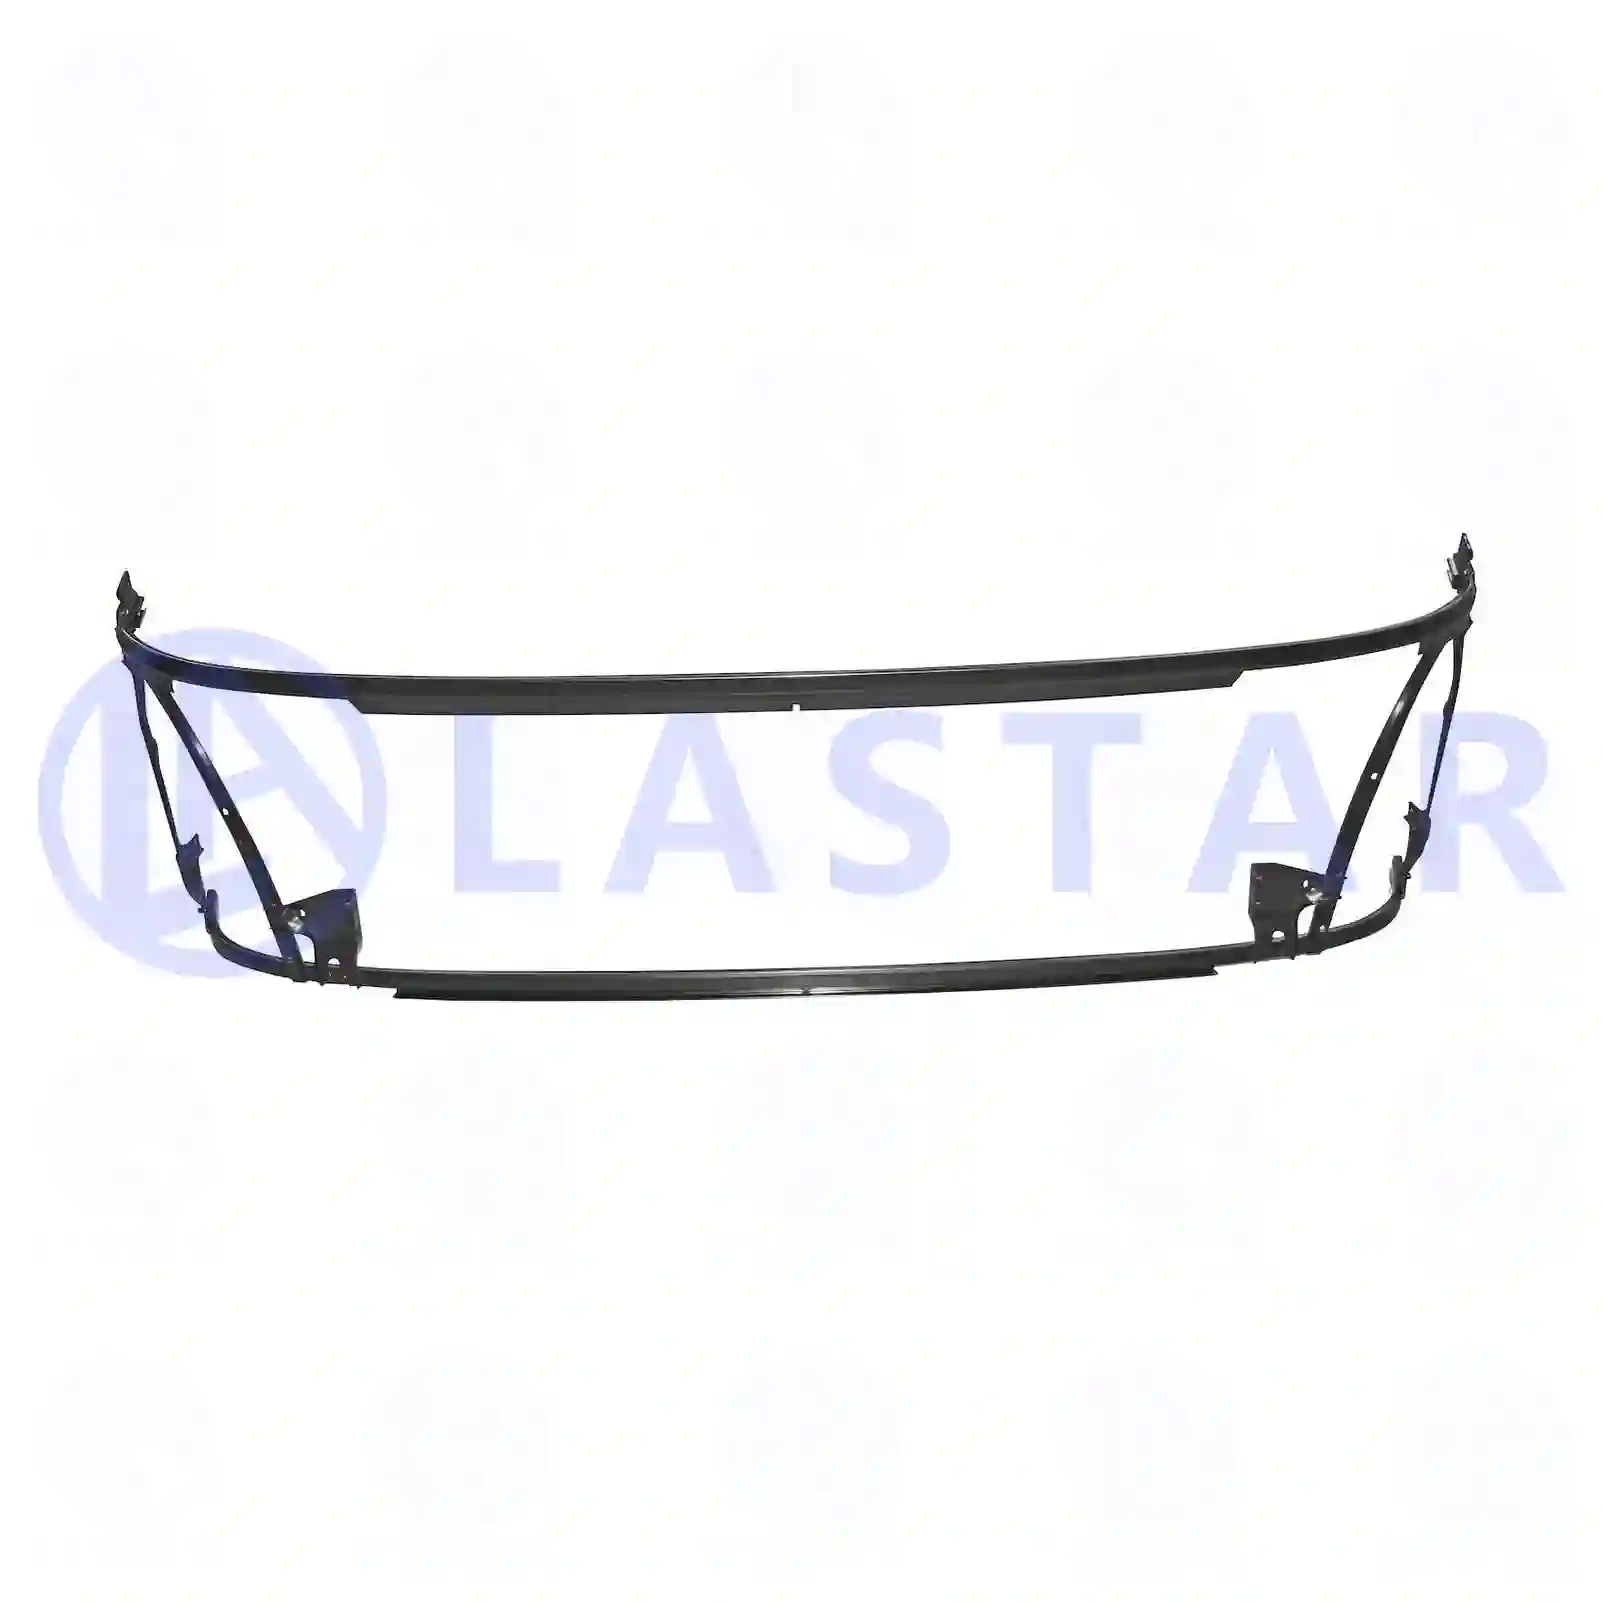 Frame, front flap, 77721642, 1732586, 1746586, 1858803, 1904814, 2008861, ZG60766-0008 ||  77721642 Lastar Spare Part | Truck Spare Parts, Auotomotive Spare Parts Frame, front flap, 77721642, 1732586, 1746586, 1858803, 1904814, 2008861, ZG60766-0008 ||  77721642 Lastar Spare Part | Truck Spare Parts, Auotomotive Spare Parts